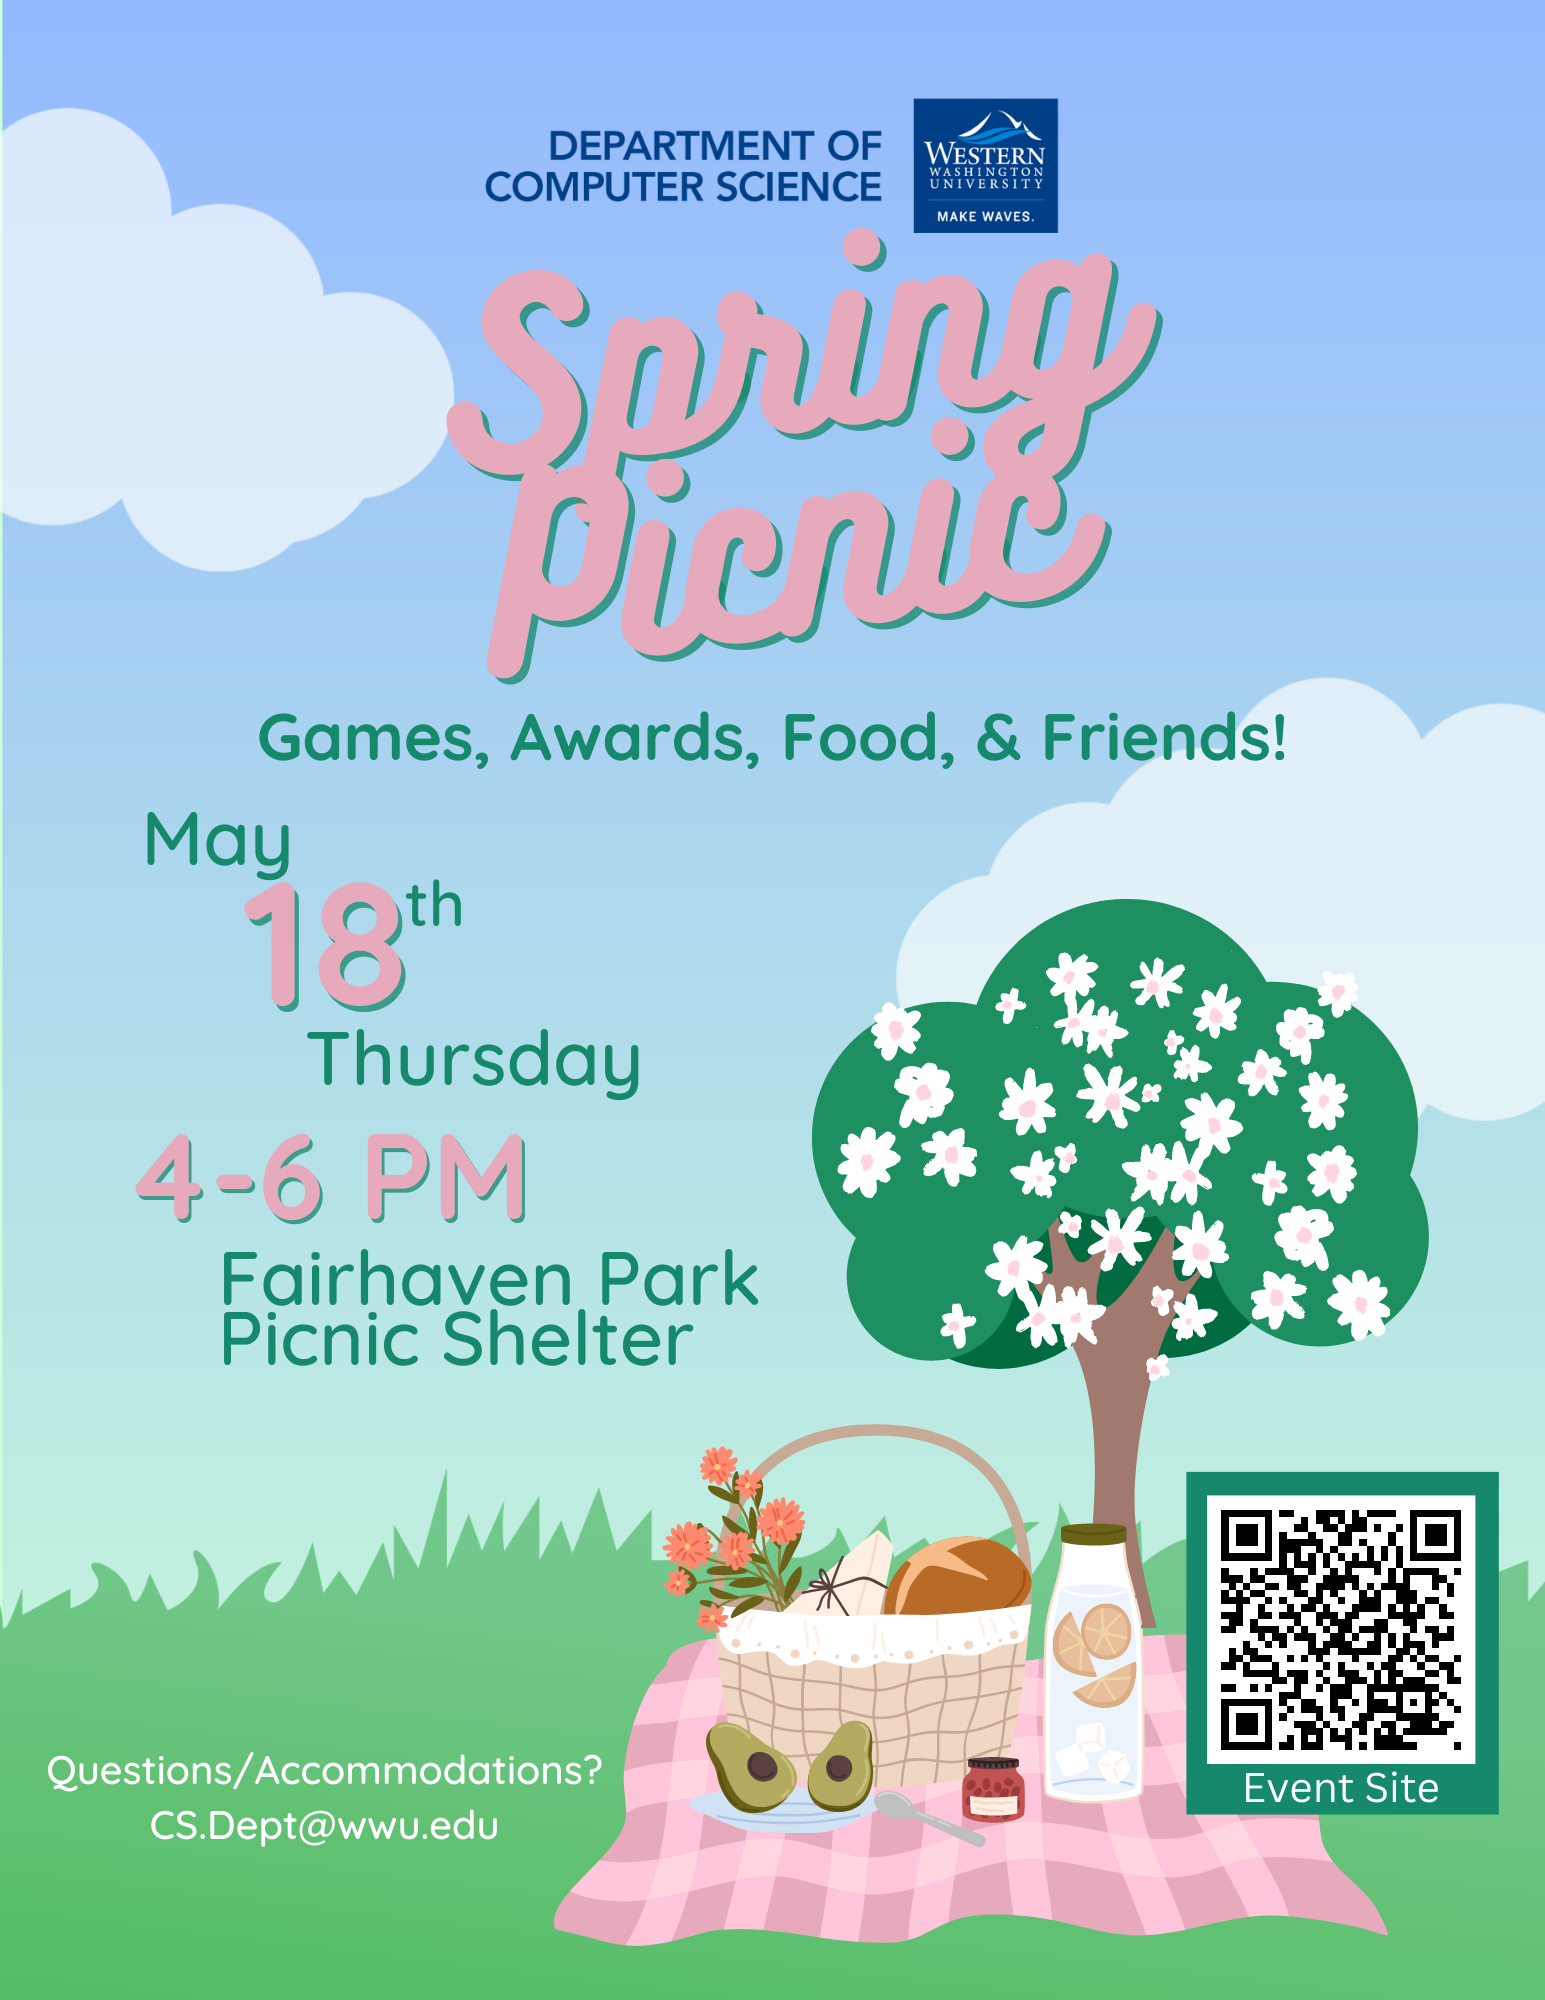 Computer Science Department Spring Picnic! Games, Awards, Food & Friends. Thursday, May 26th from 4 to 6 PM at the Fairhaven Park Picnic Shelter.